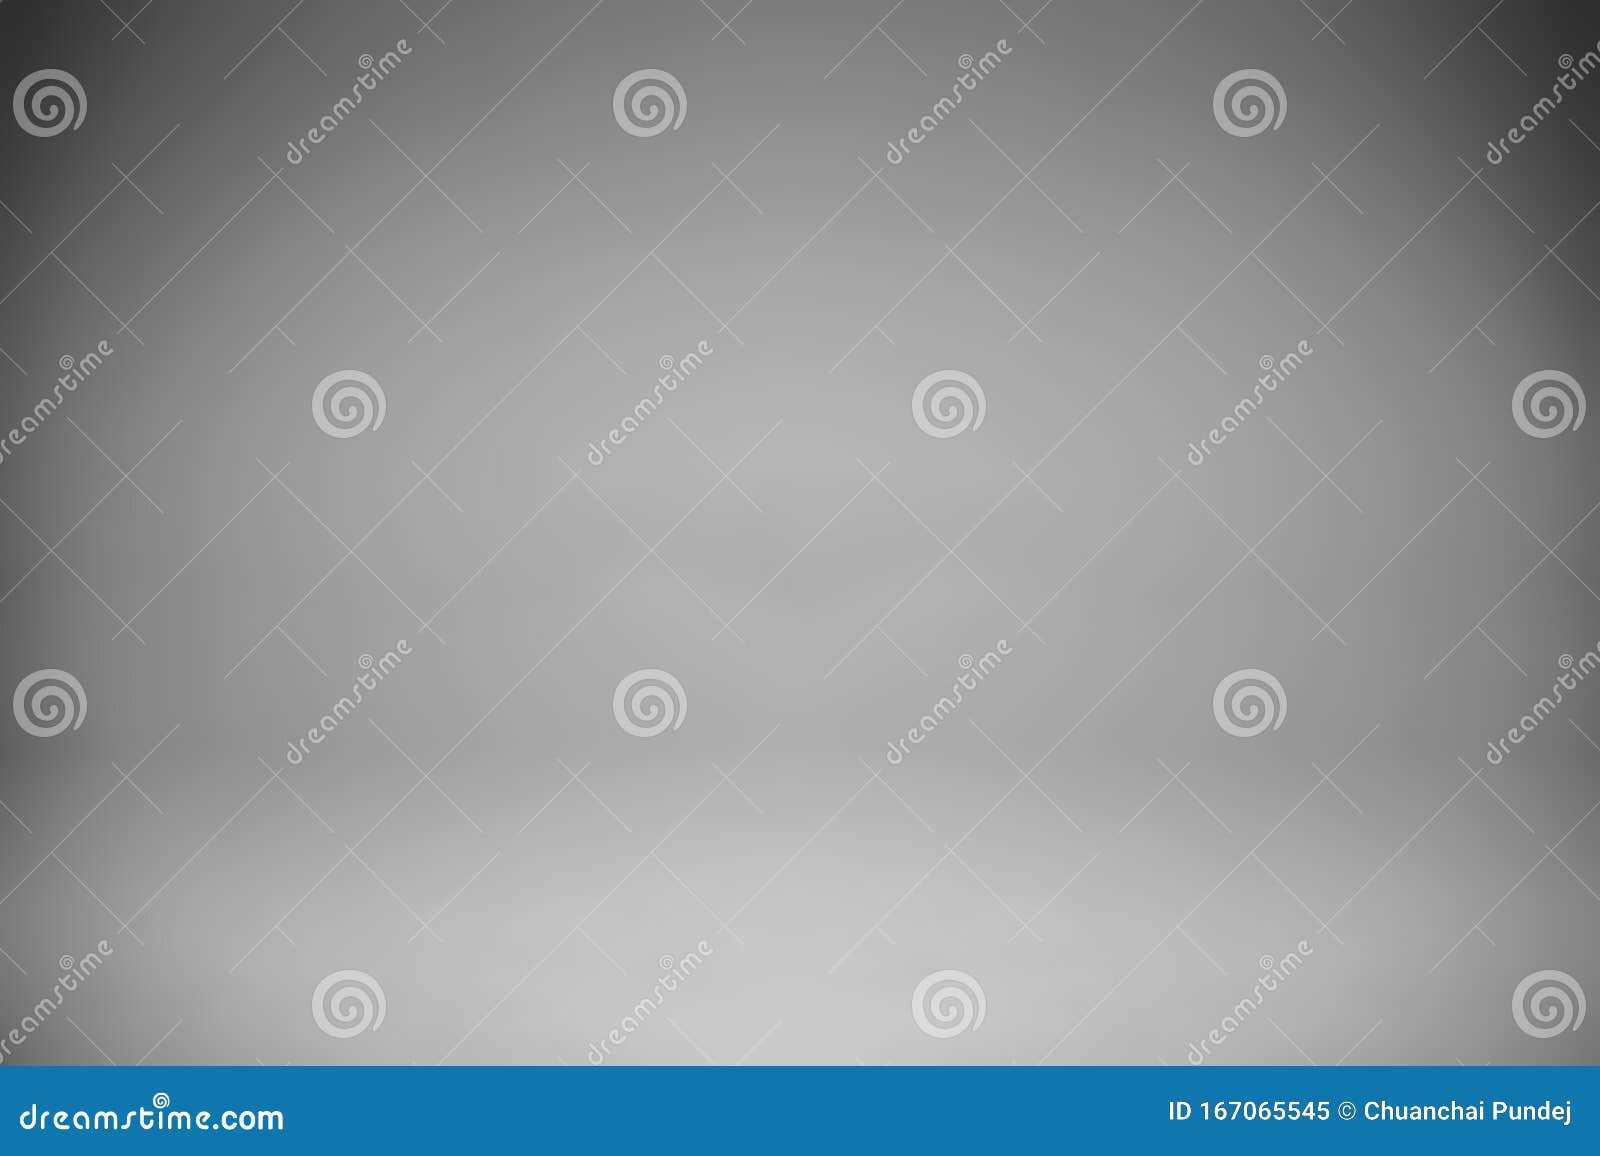 gray light studio background for background use